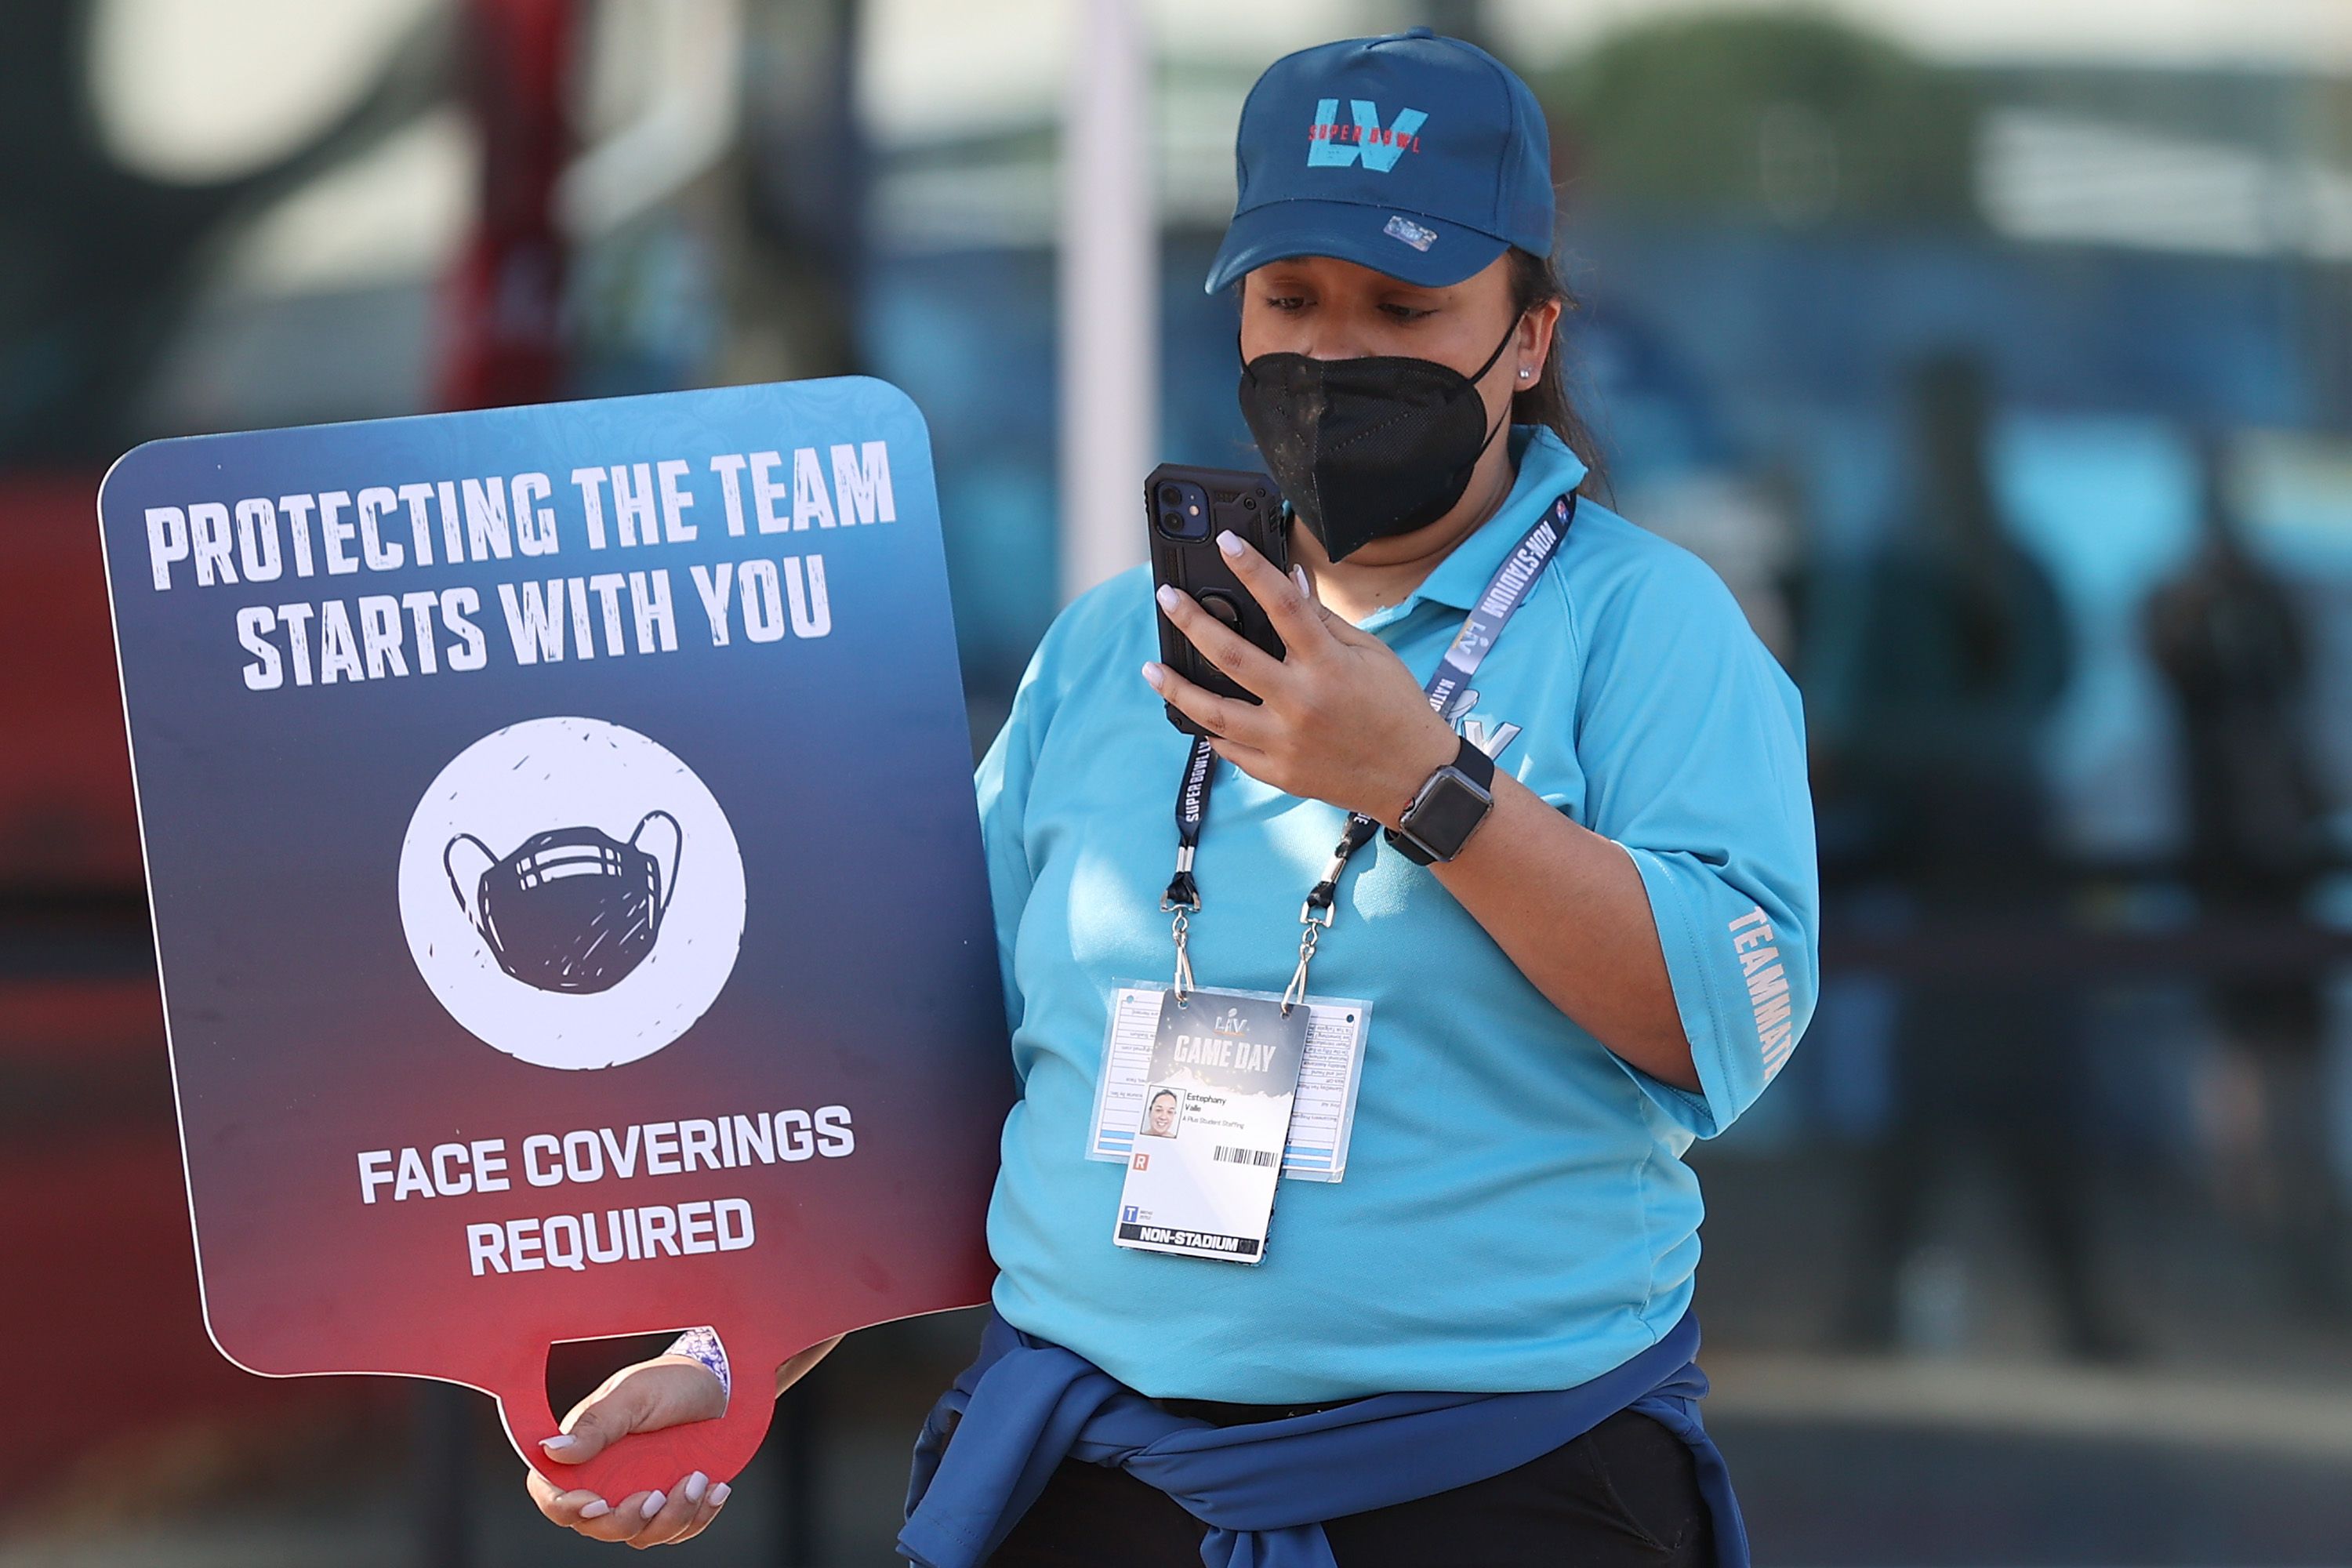 A worker holds a 'face coverings required' sign before Super Bowl LV between the Tampa Bay Buccaneers and the Kansas City Chiefs at Raymond James Stadium on February 07, 2021 in Tampa, Florida.